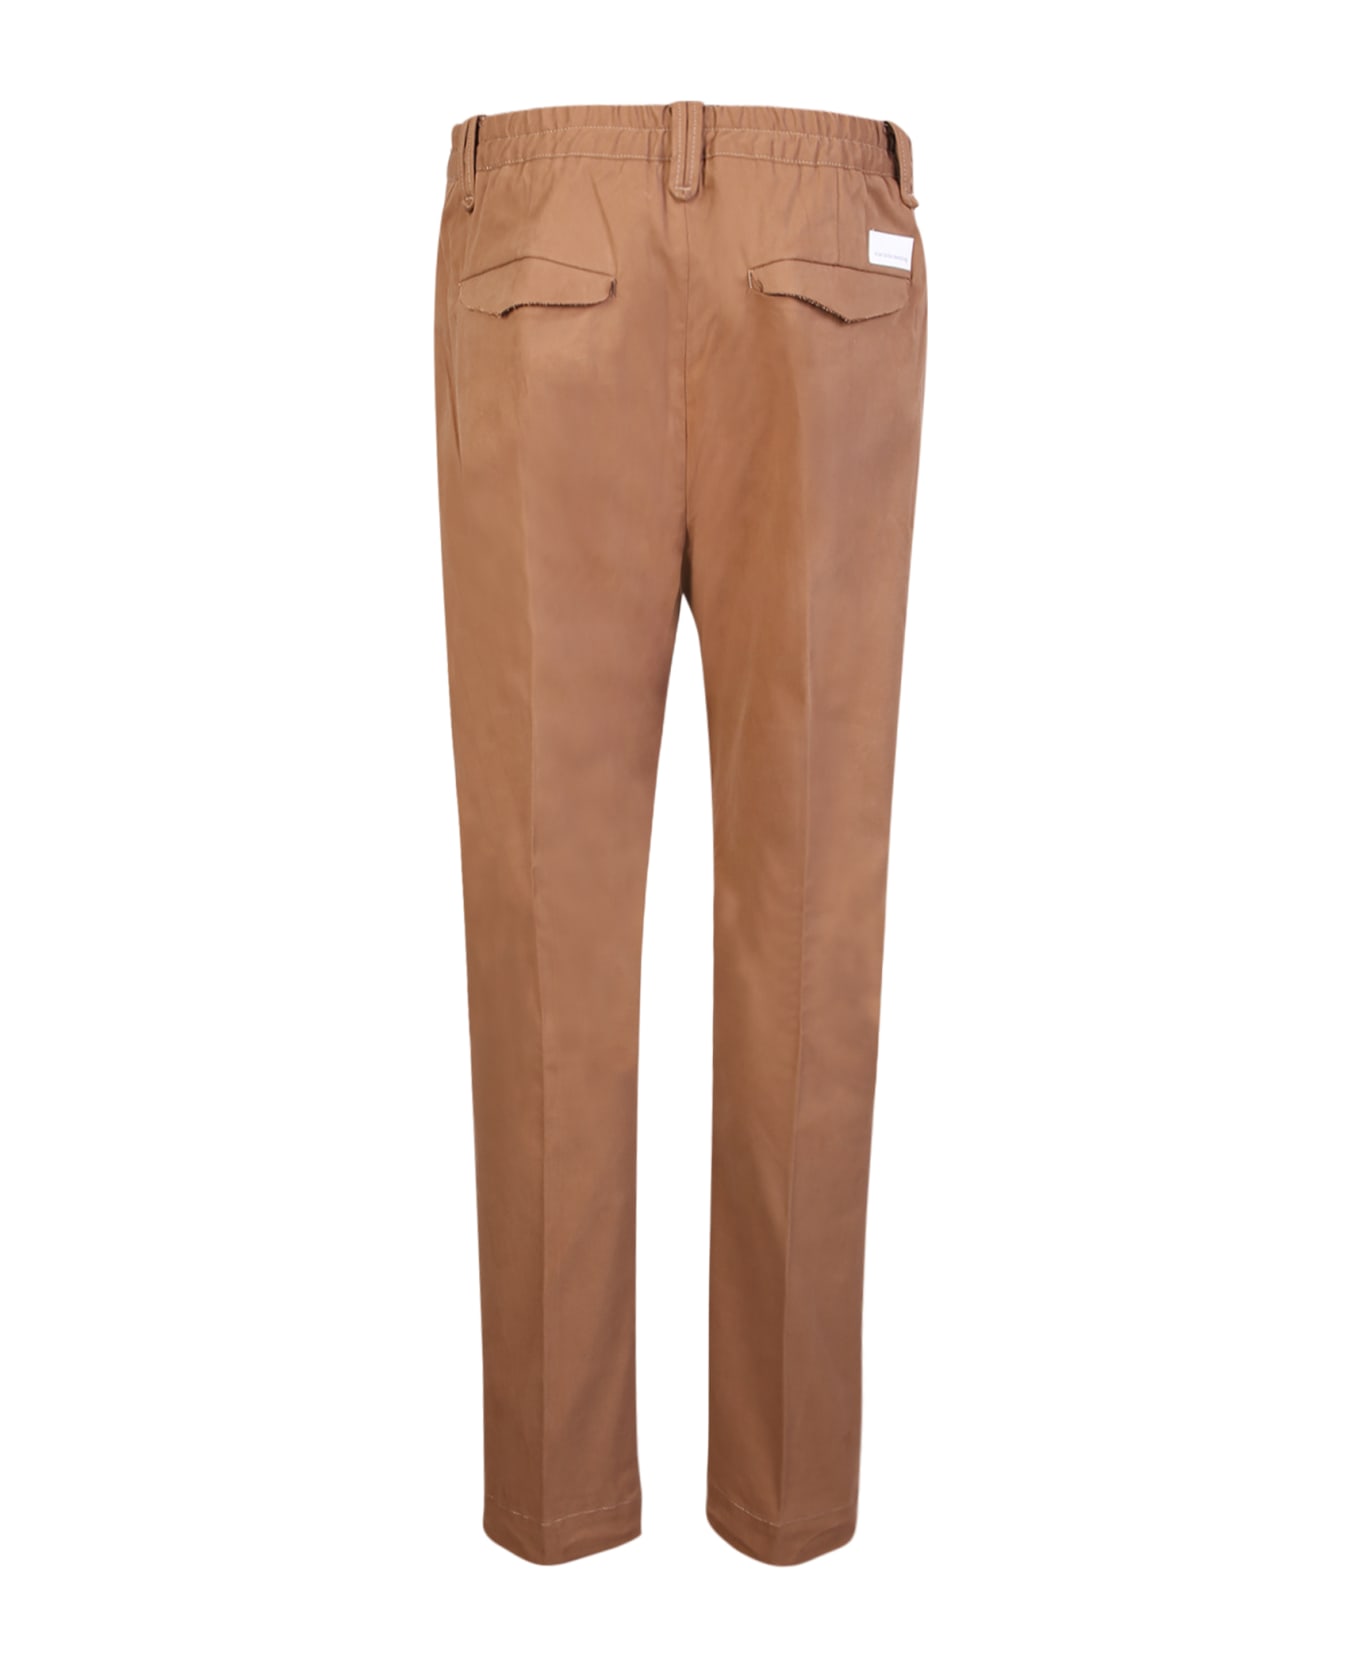 Nine in the Morning Bisquit Yoga Trousers - Beige ボトムス